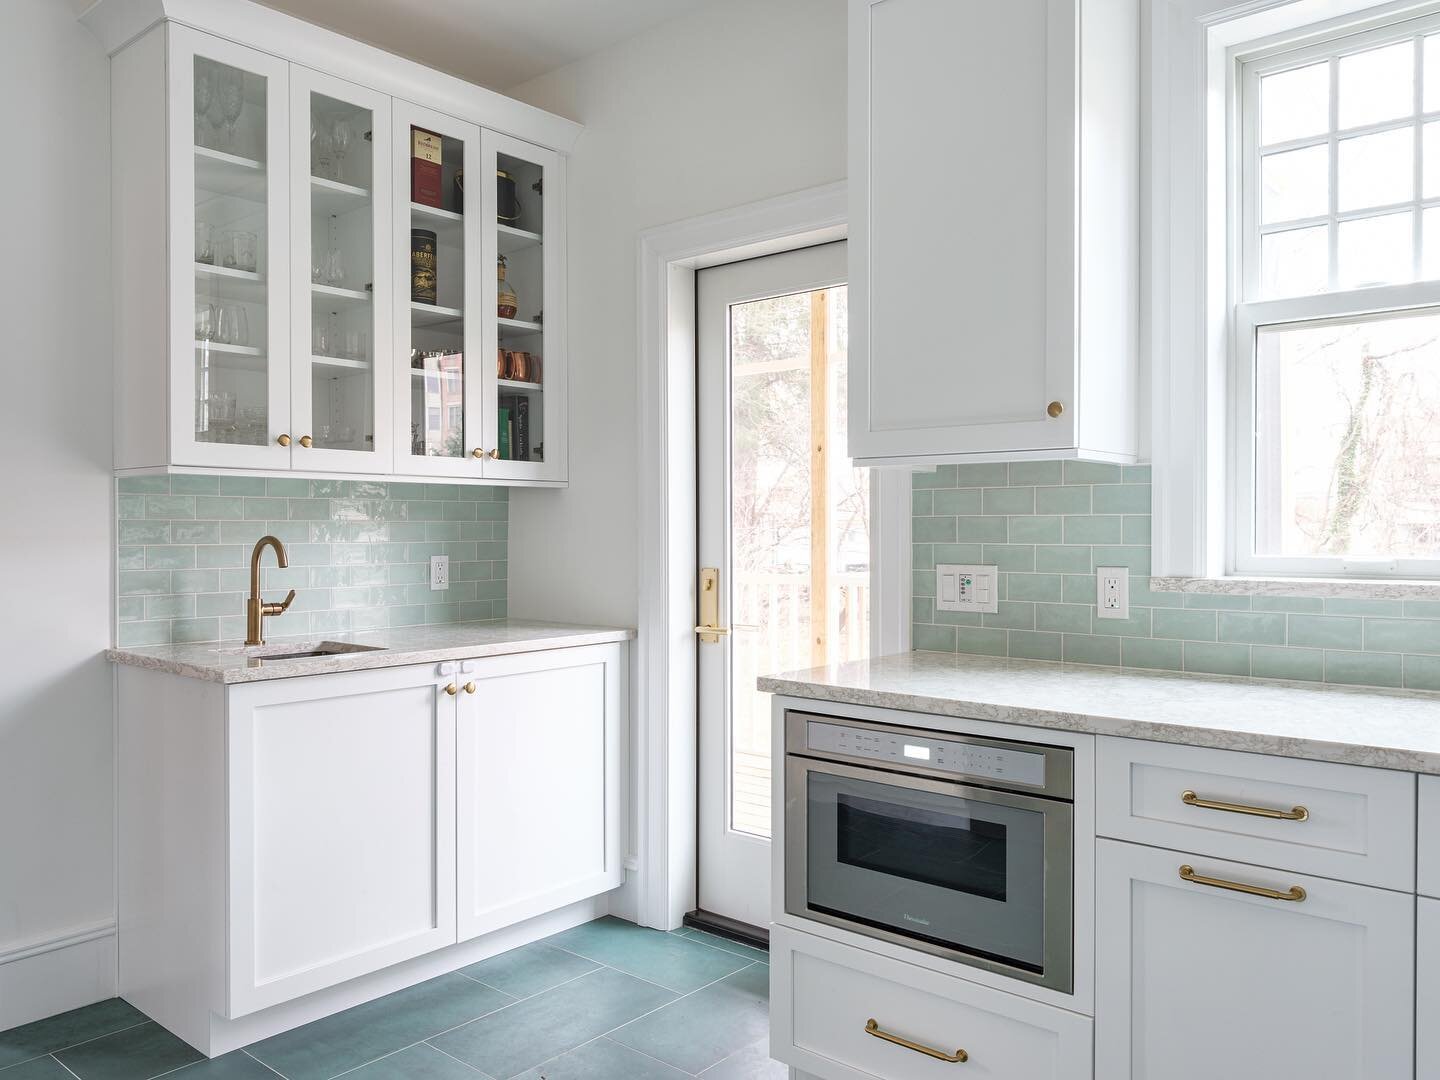 We placed this bar area with its own prep sink along a small wall in this beautiful modern farmhouse kitchen. The crisp white shaker cabinets from @majestic_kitchens_and_baths contrast with the soft green hues of the backsplash and floor. This space 